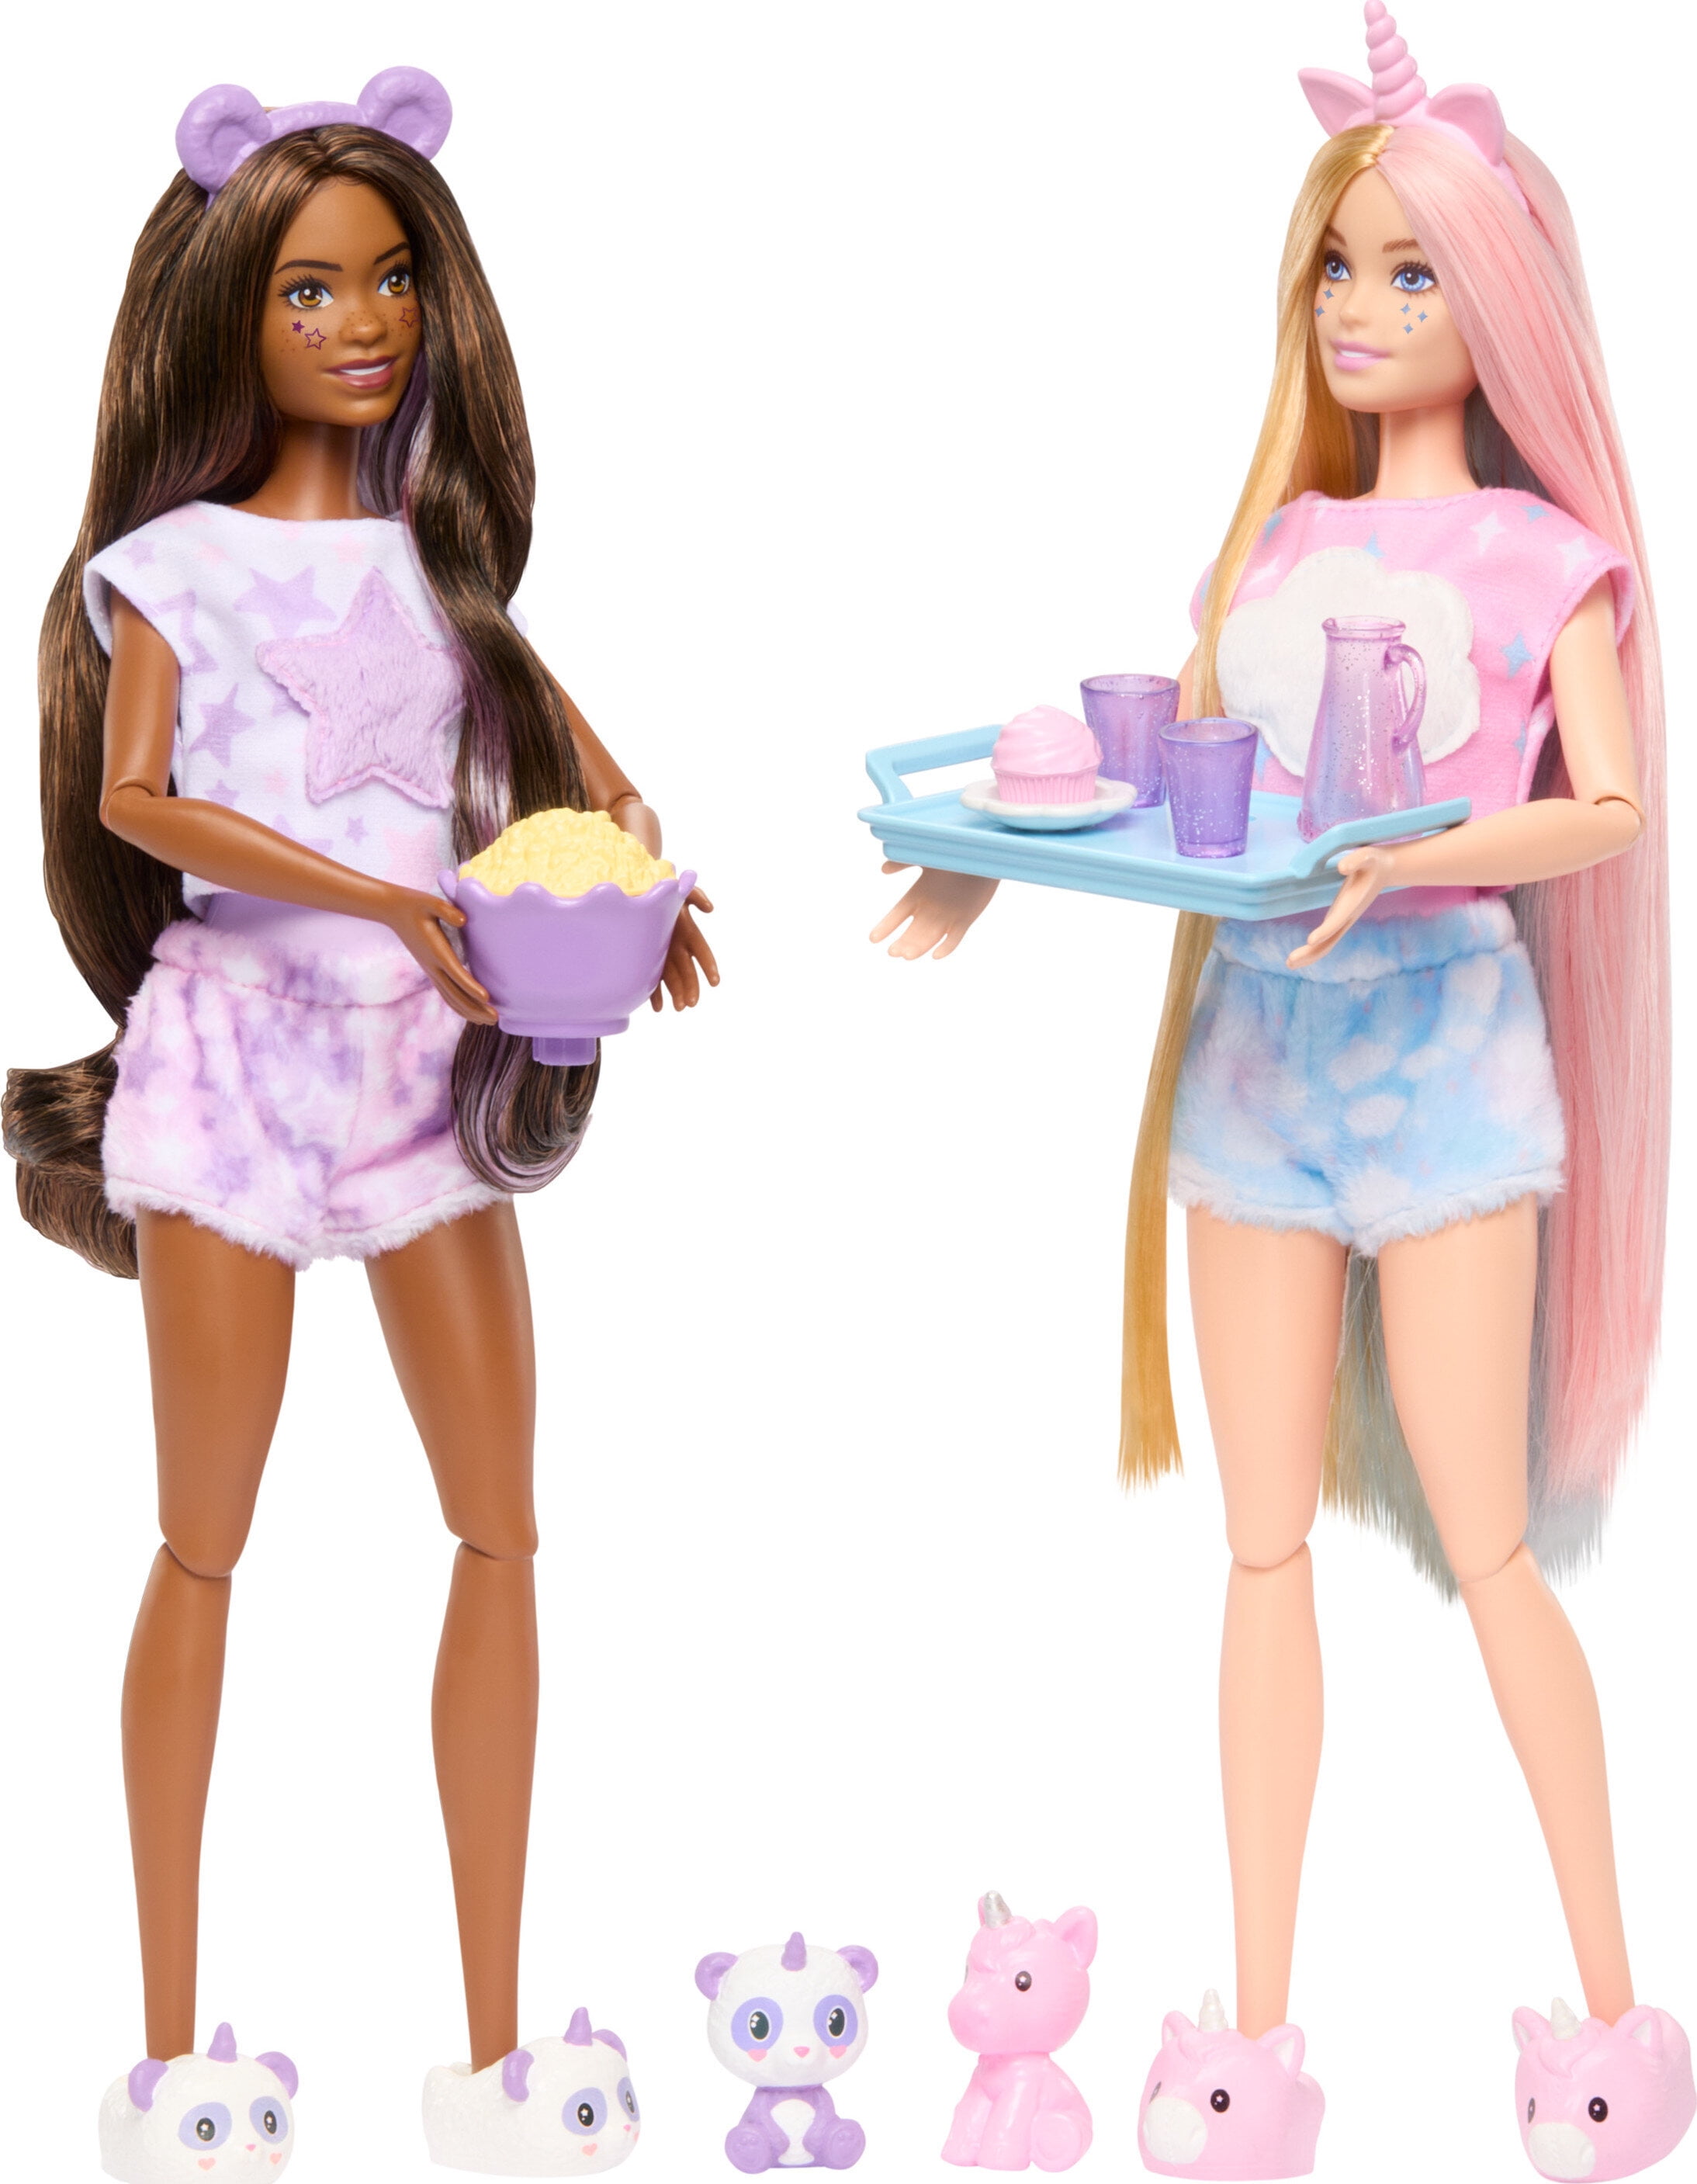 New Barbie collection celebrates the importance of wellness and